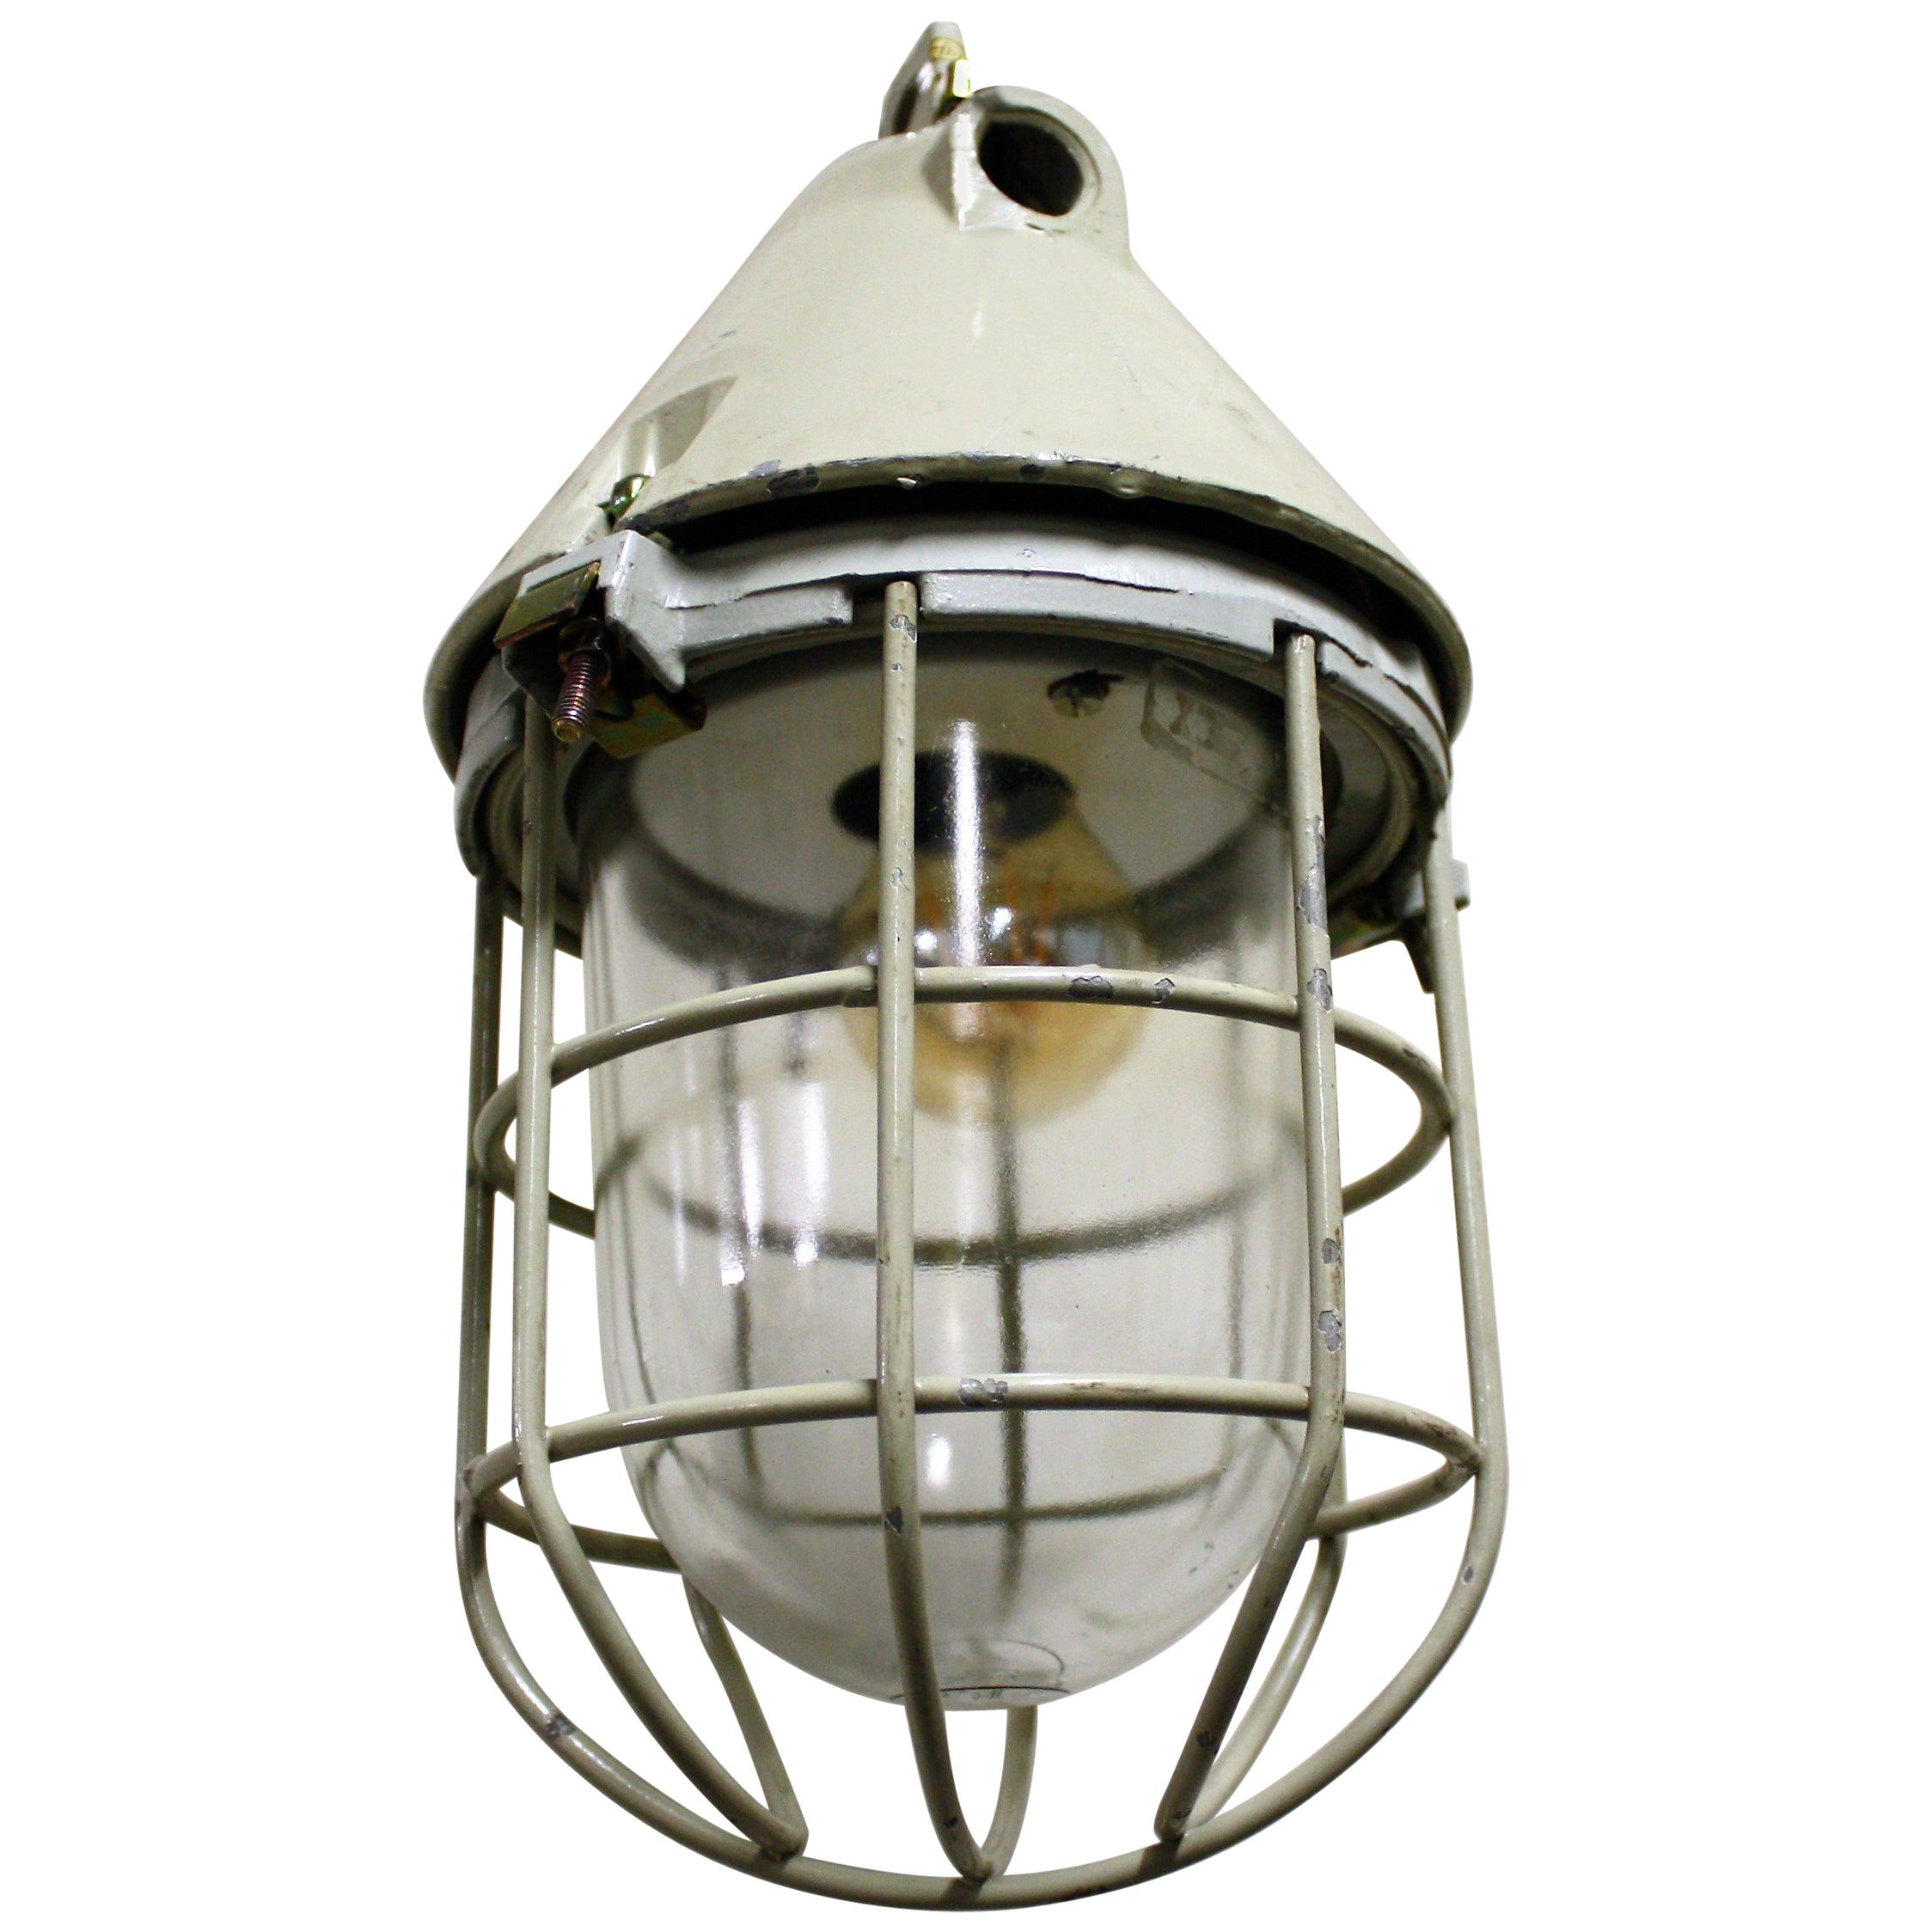 Vintage Industrial Caged Bully or Bunker Lamp by EOW, Germany